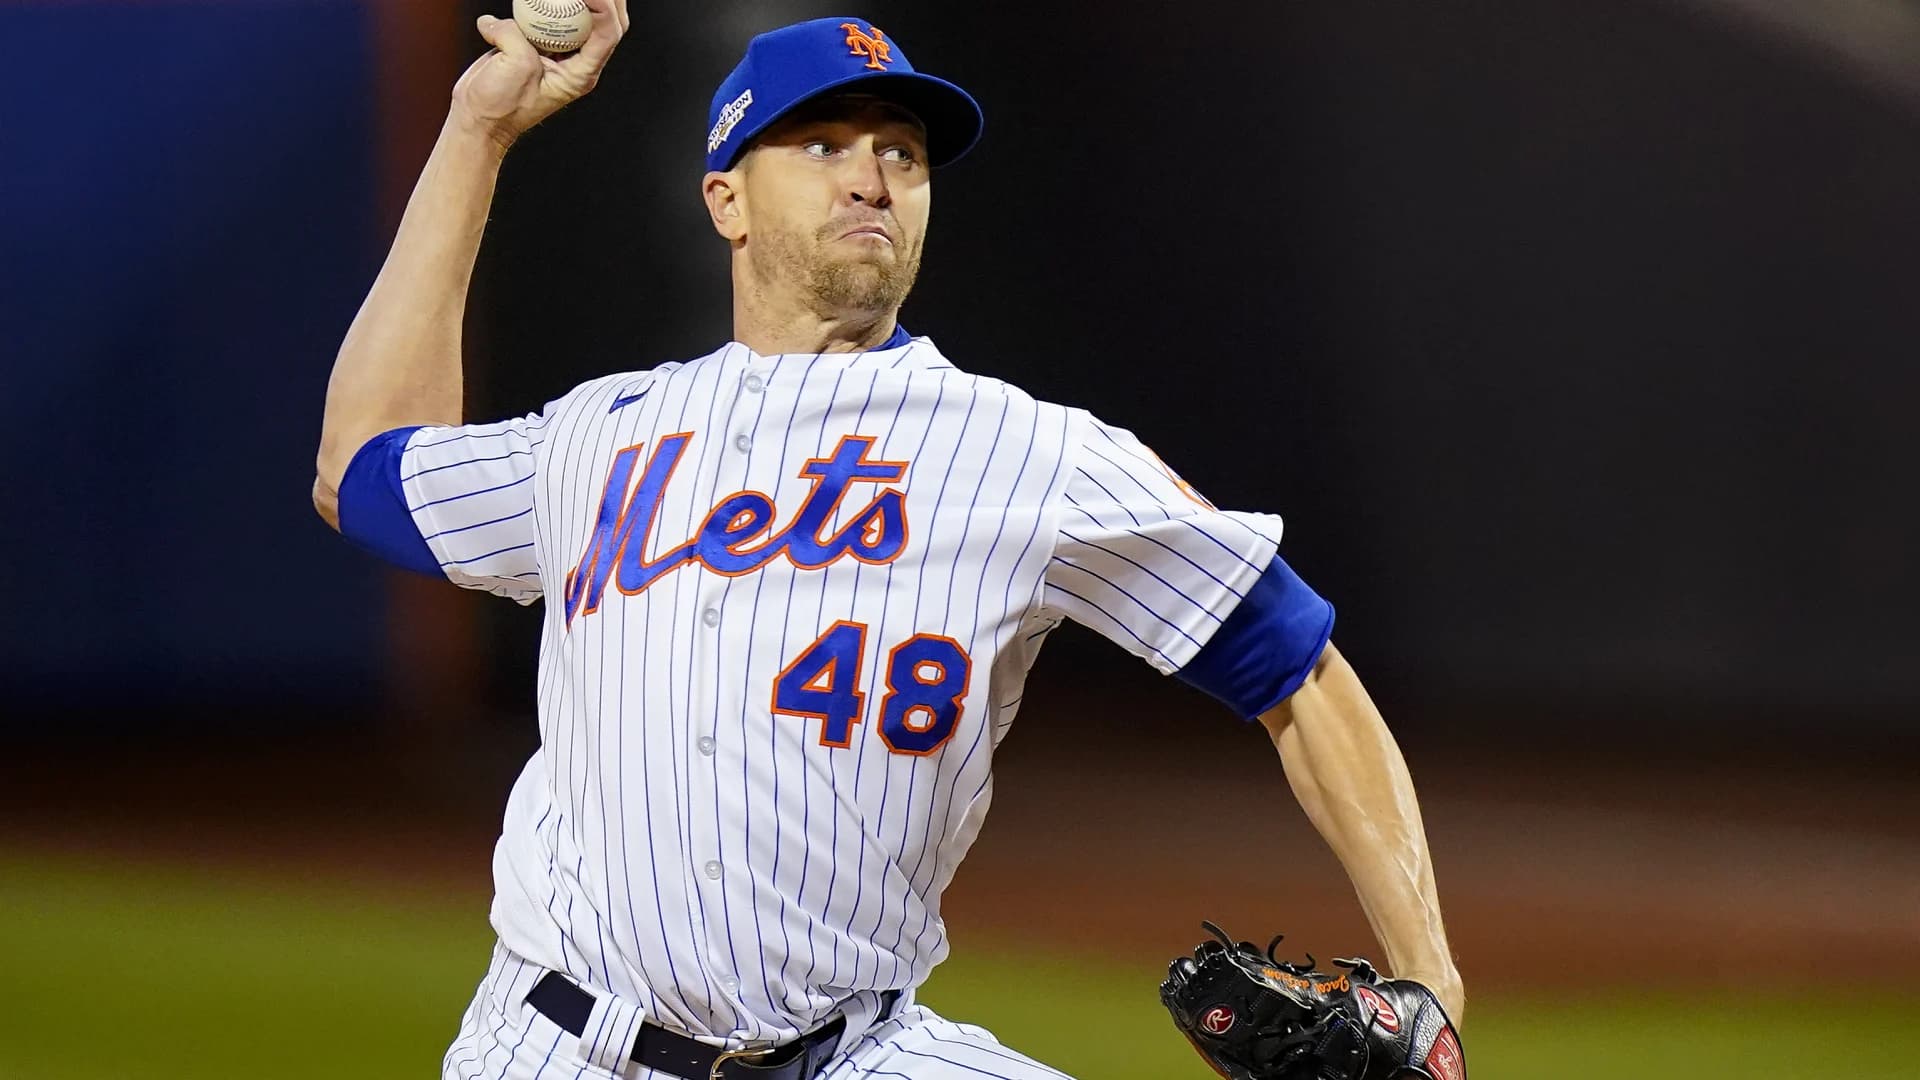 Texas Rangers ink free-agent ace Jacob deGrom to 5-year deal